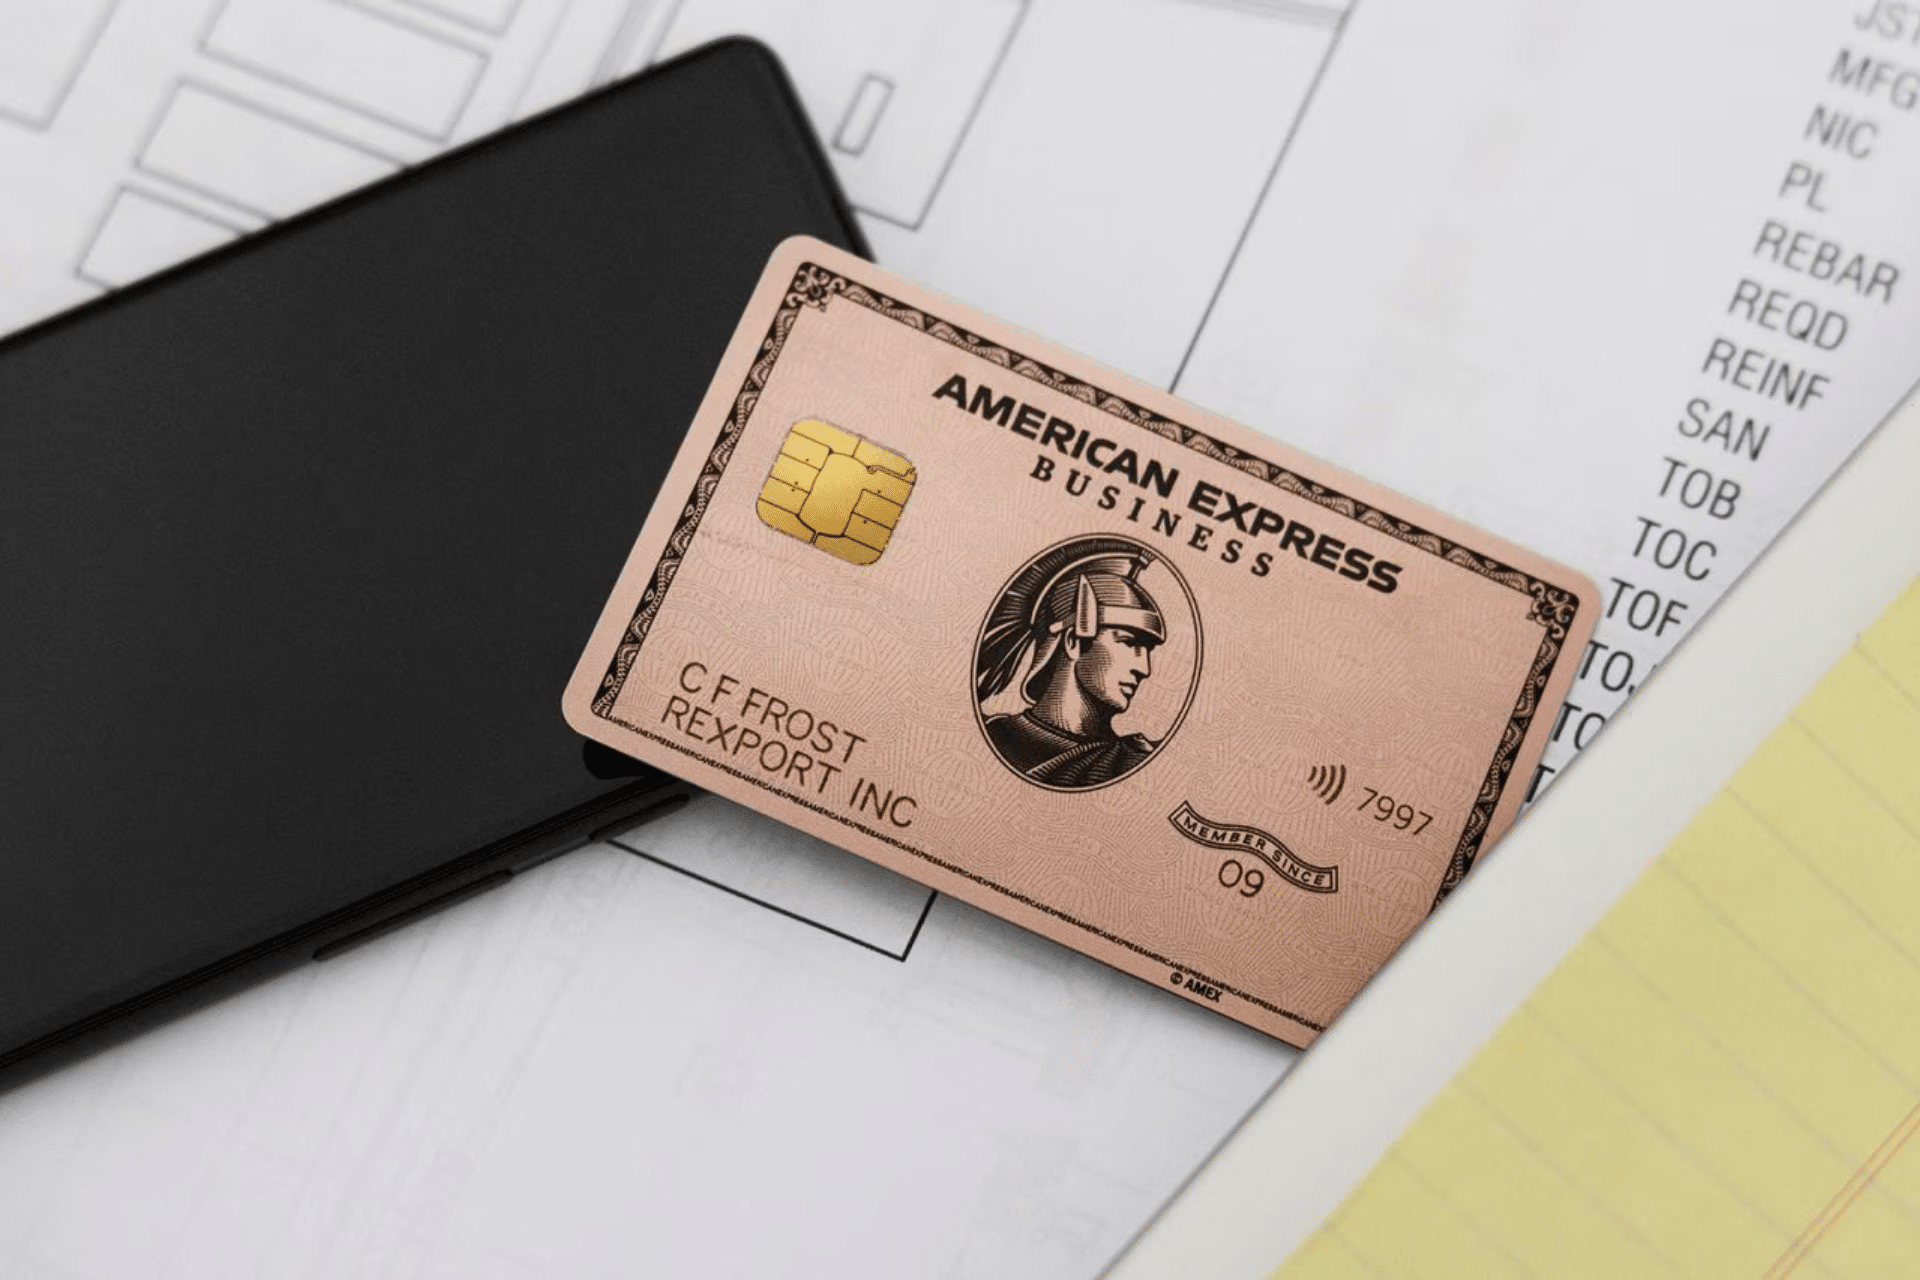 Amex U.S. Business Gold Card Gets Amplified Benefits